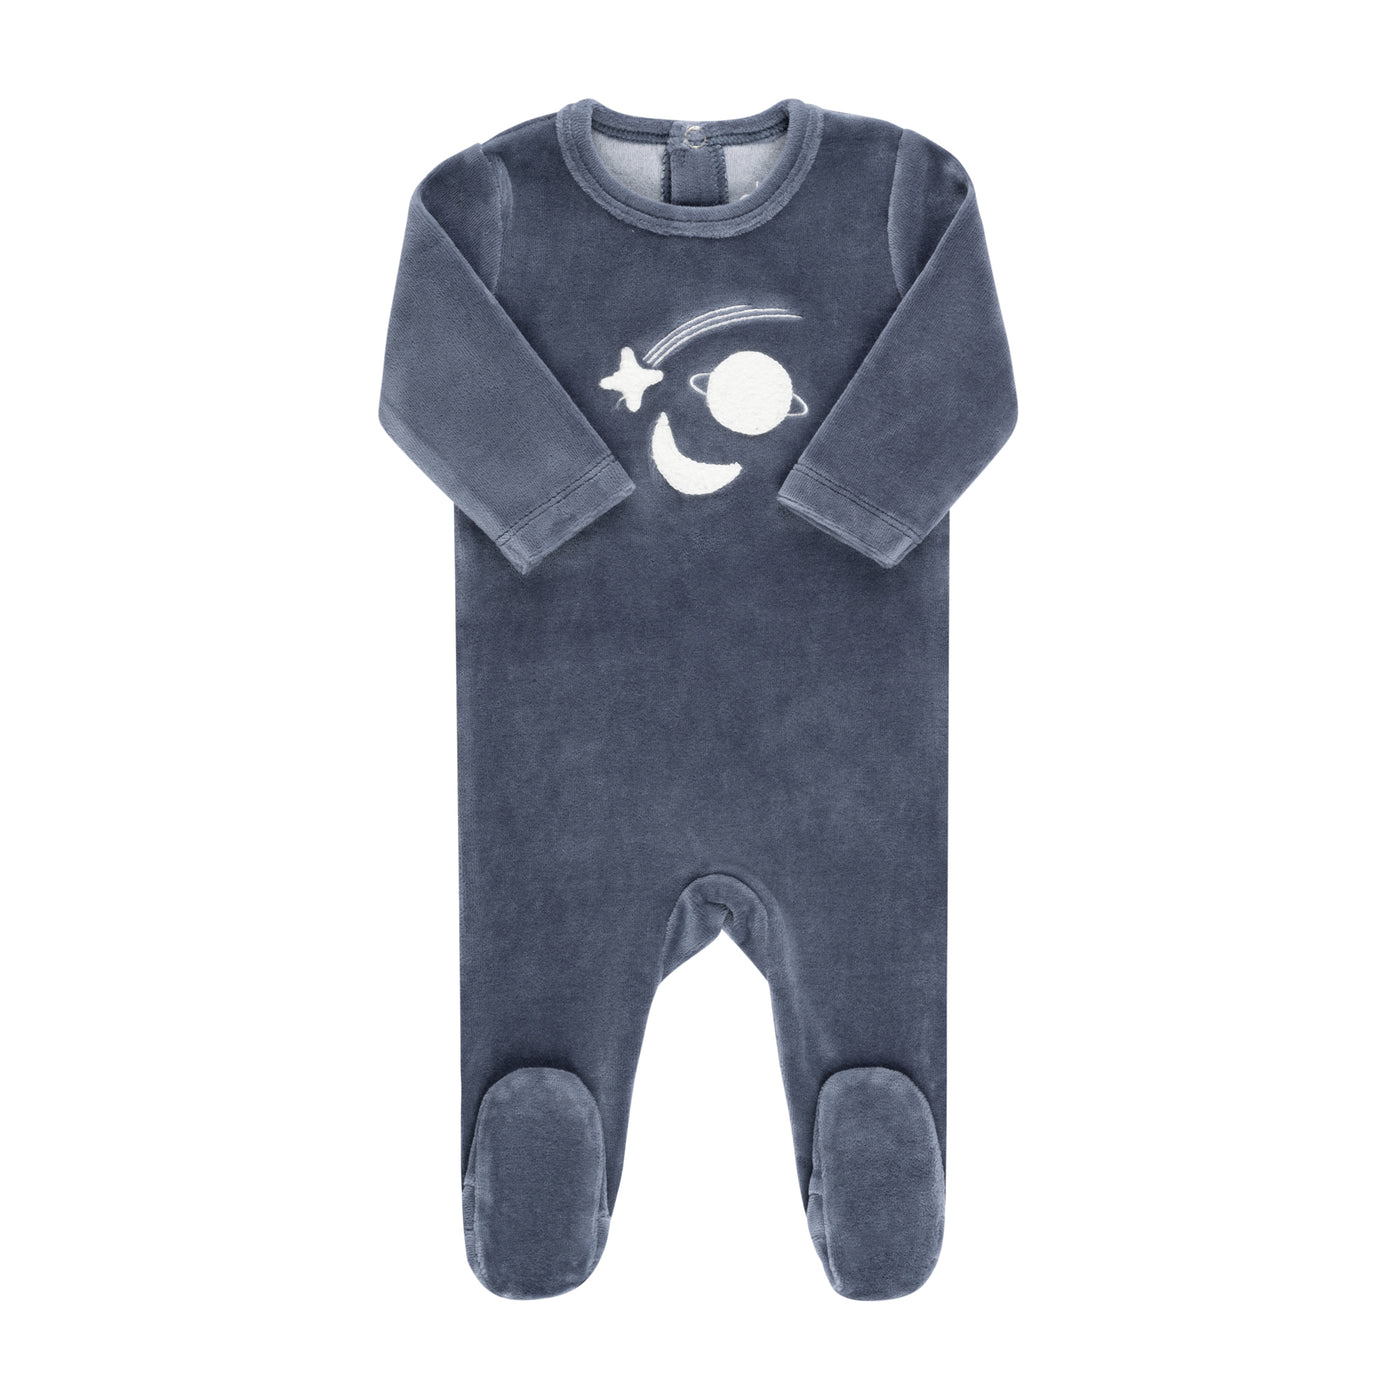 Ely's & Co. Celestial Collection Navy Velour Footie